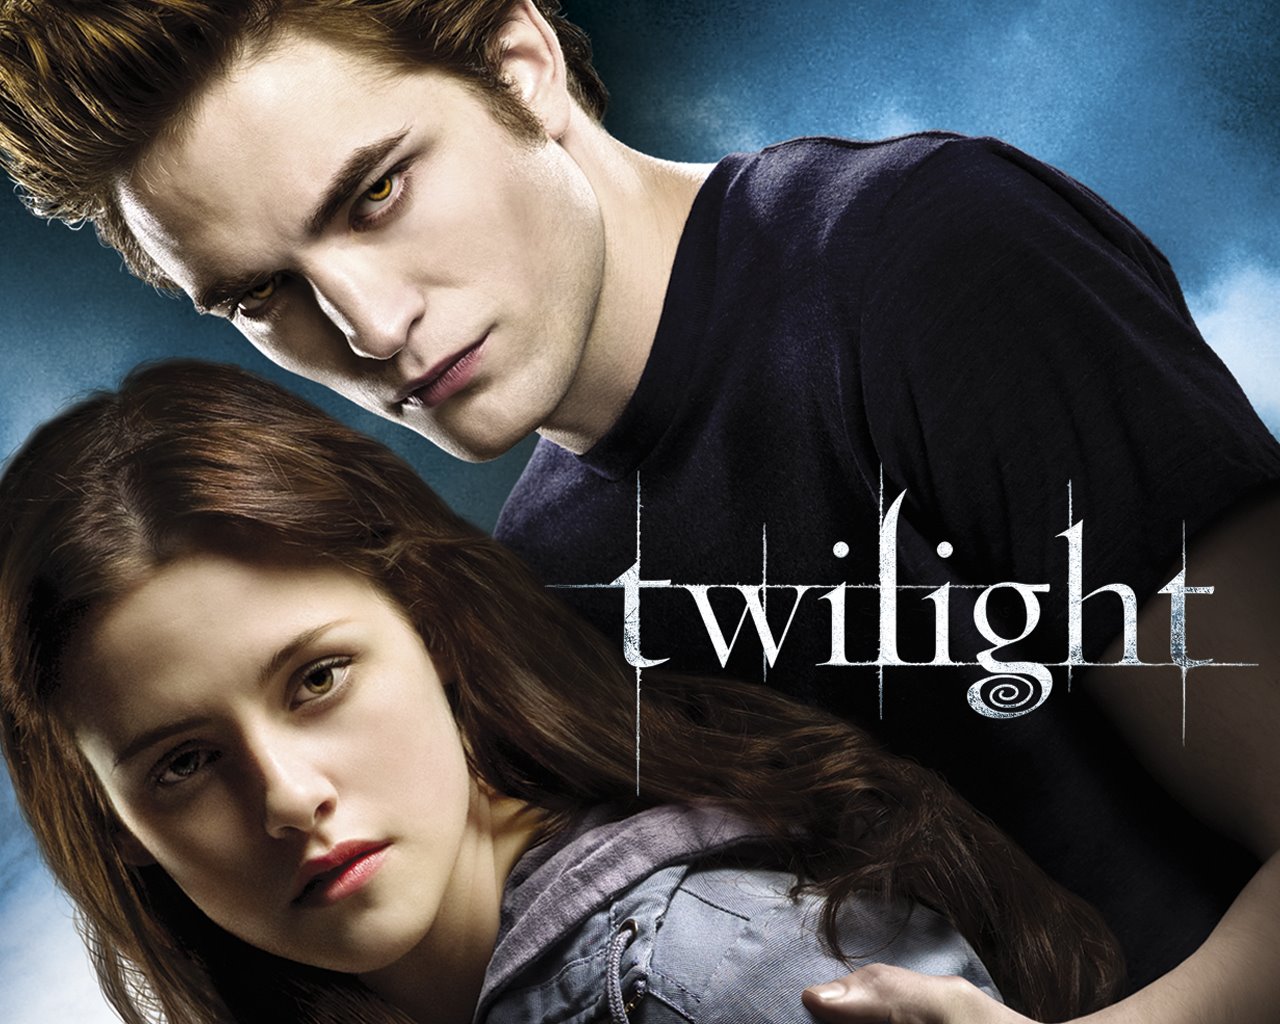 Previous, Movies - Films T - Bella and Edward / Twilight wallpaper